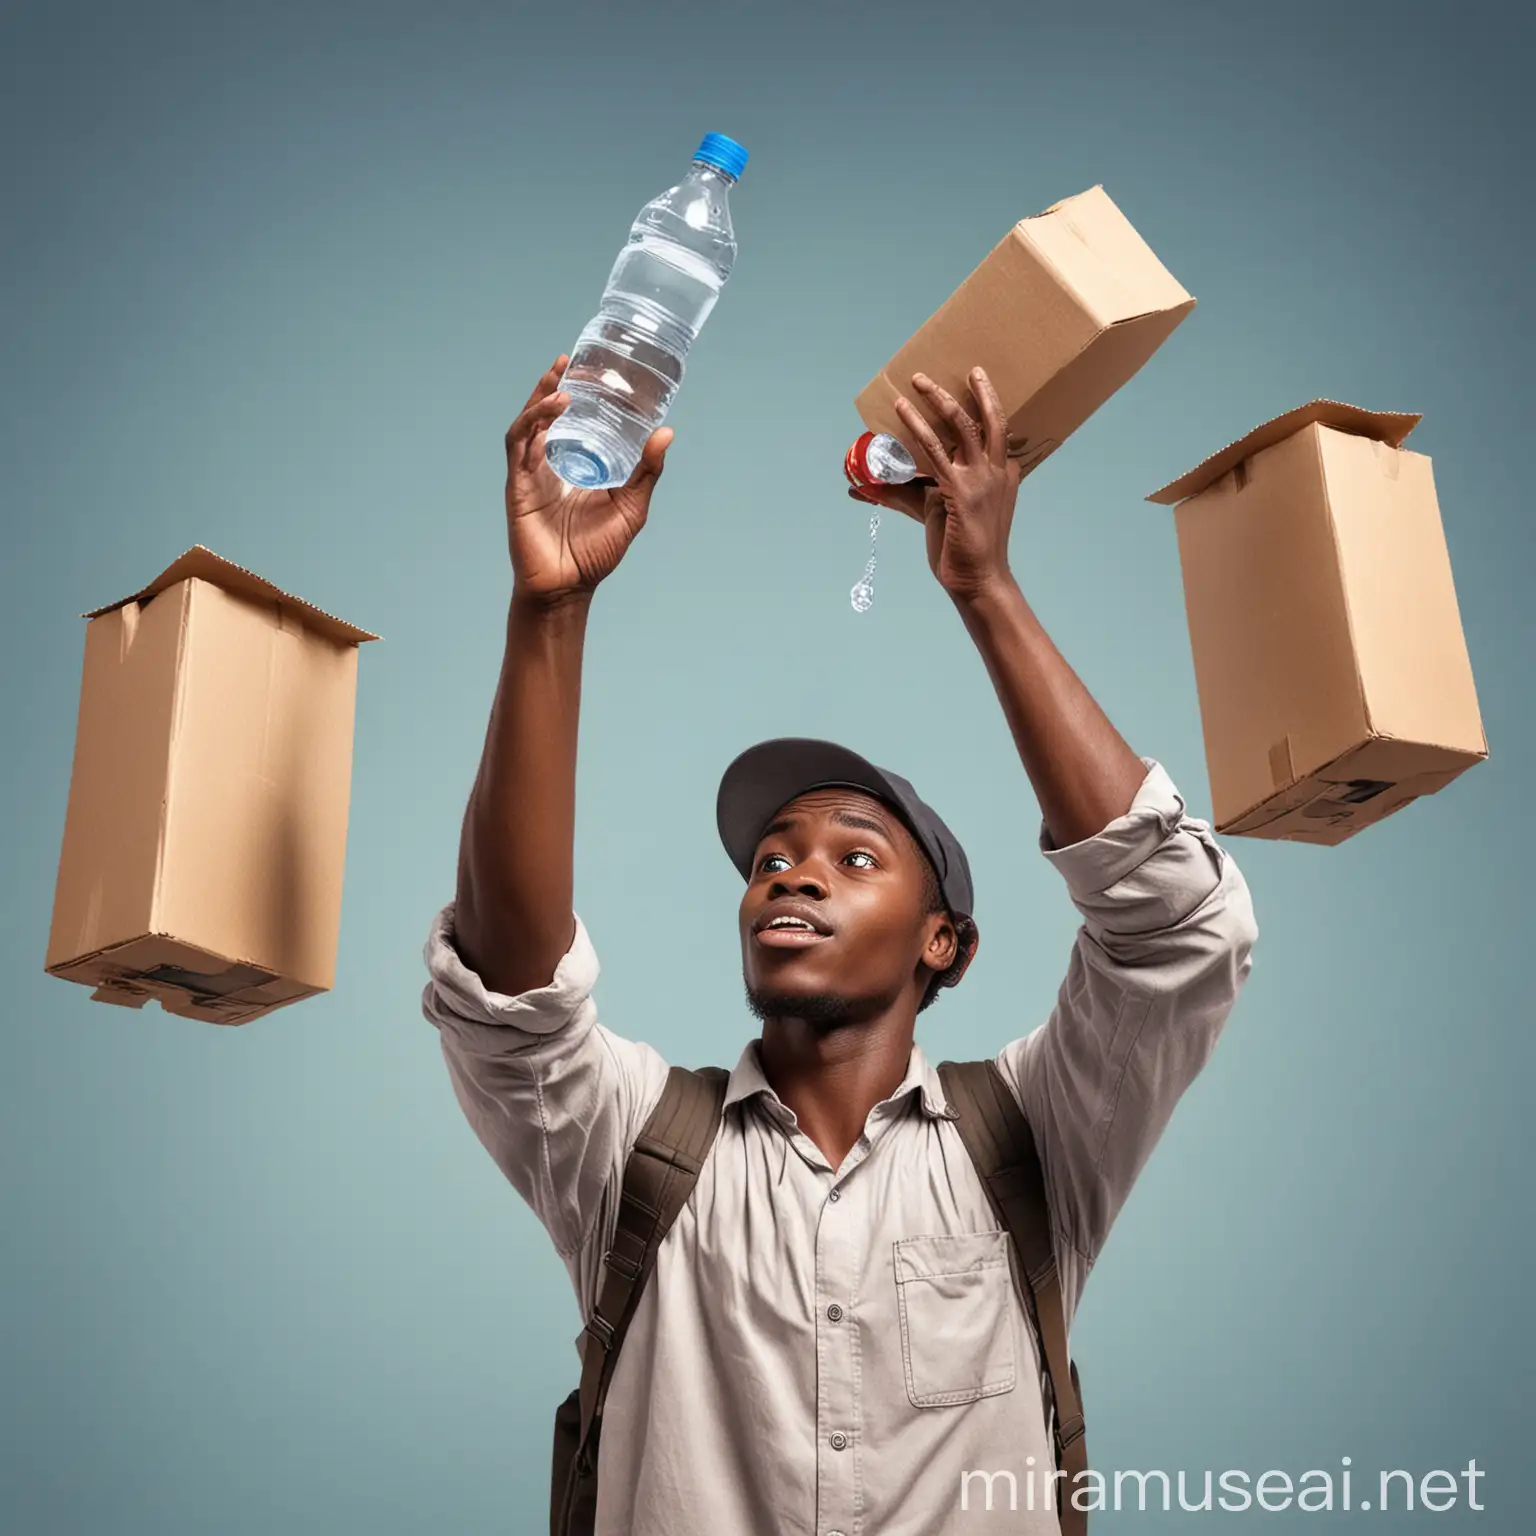 Create a realistic full image of an African young man selling small drinking water bottles, he is raising one bottle in the air to show it, he is also carrying the other bottles in a carton with the other hand.